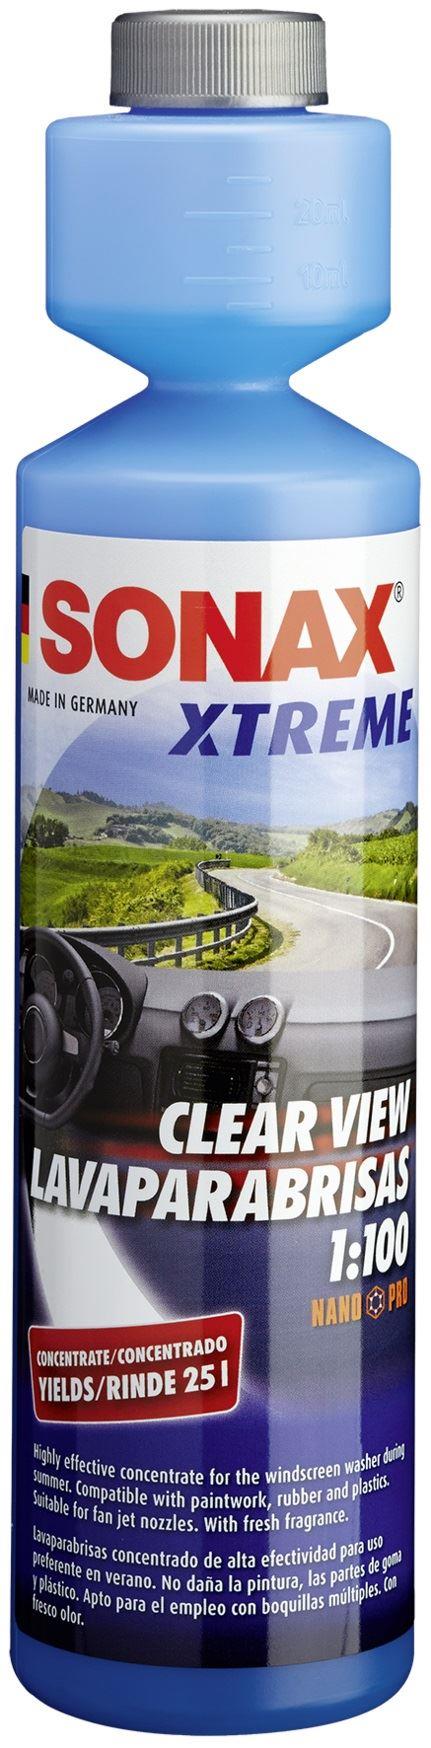 Sonax XTREME Clear View 1:100 Concentrate Nanopro – in2Detailing